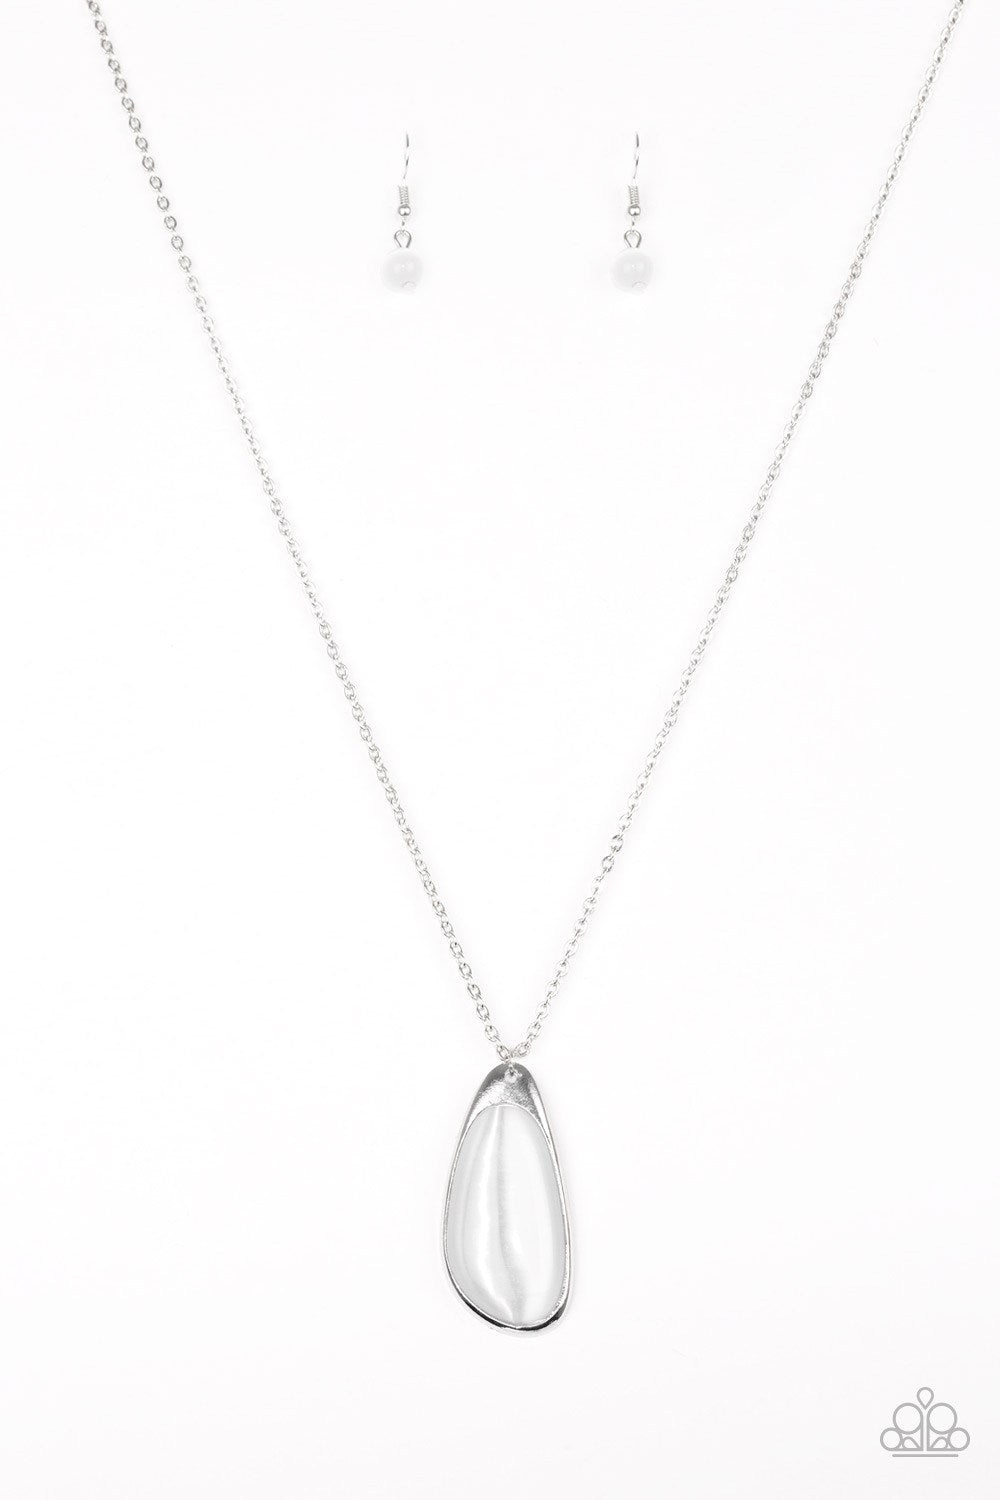 Magically Modern White Moonstone Necklace - Paparazzi Accessories 